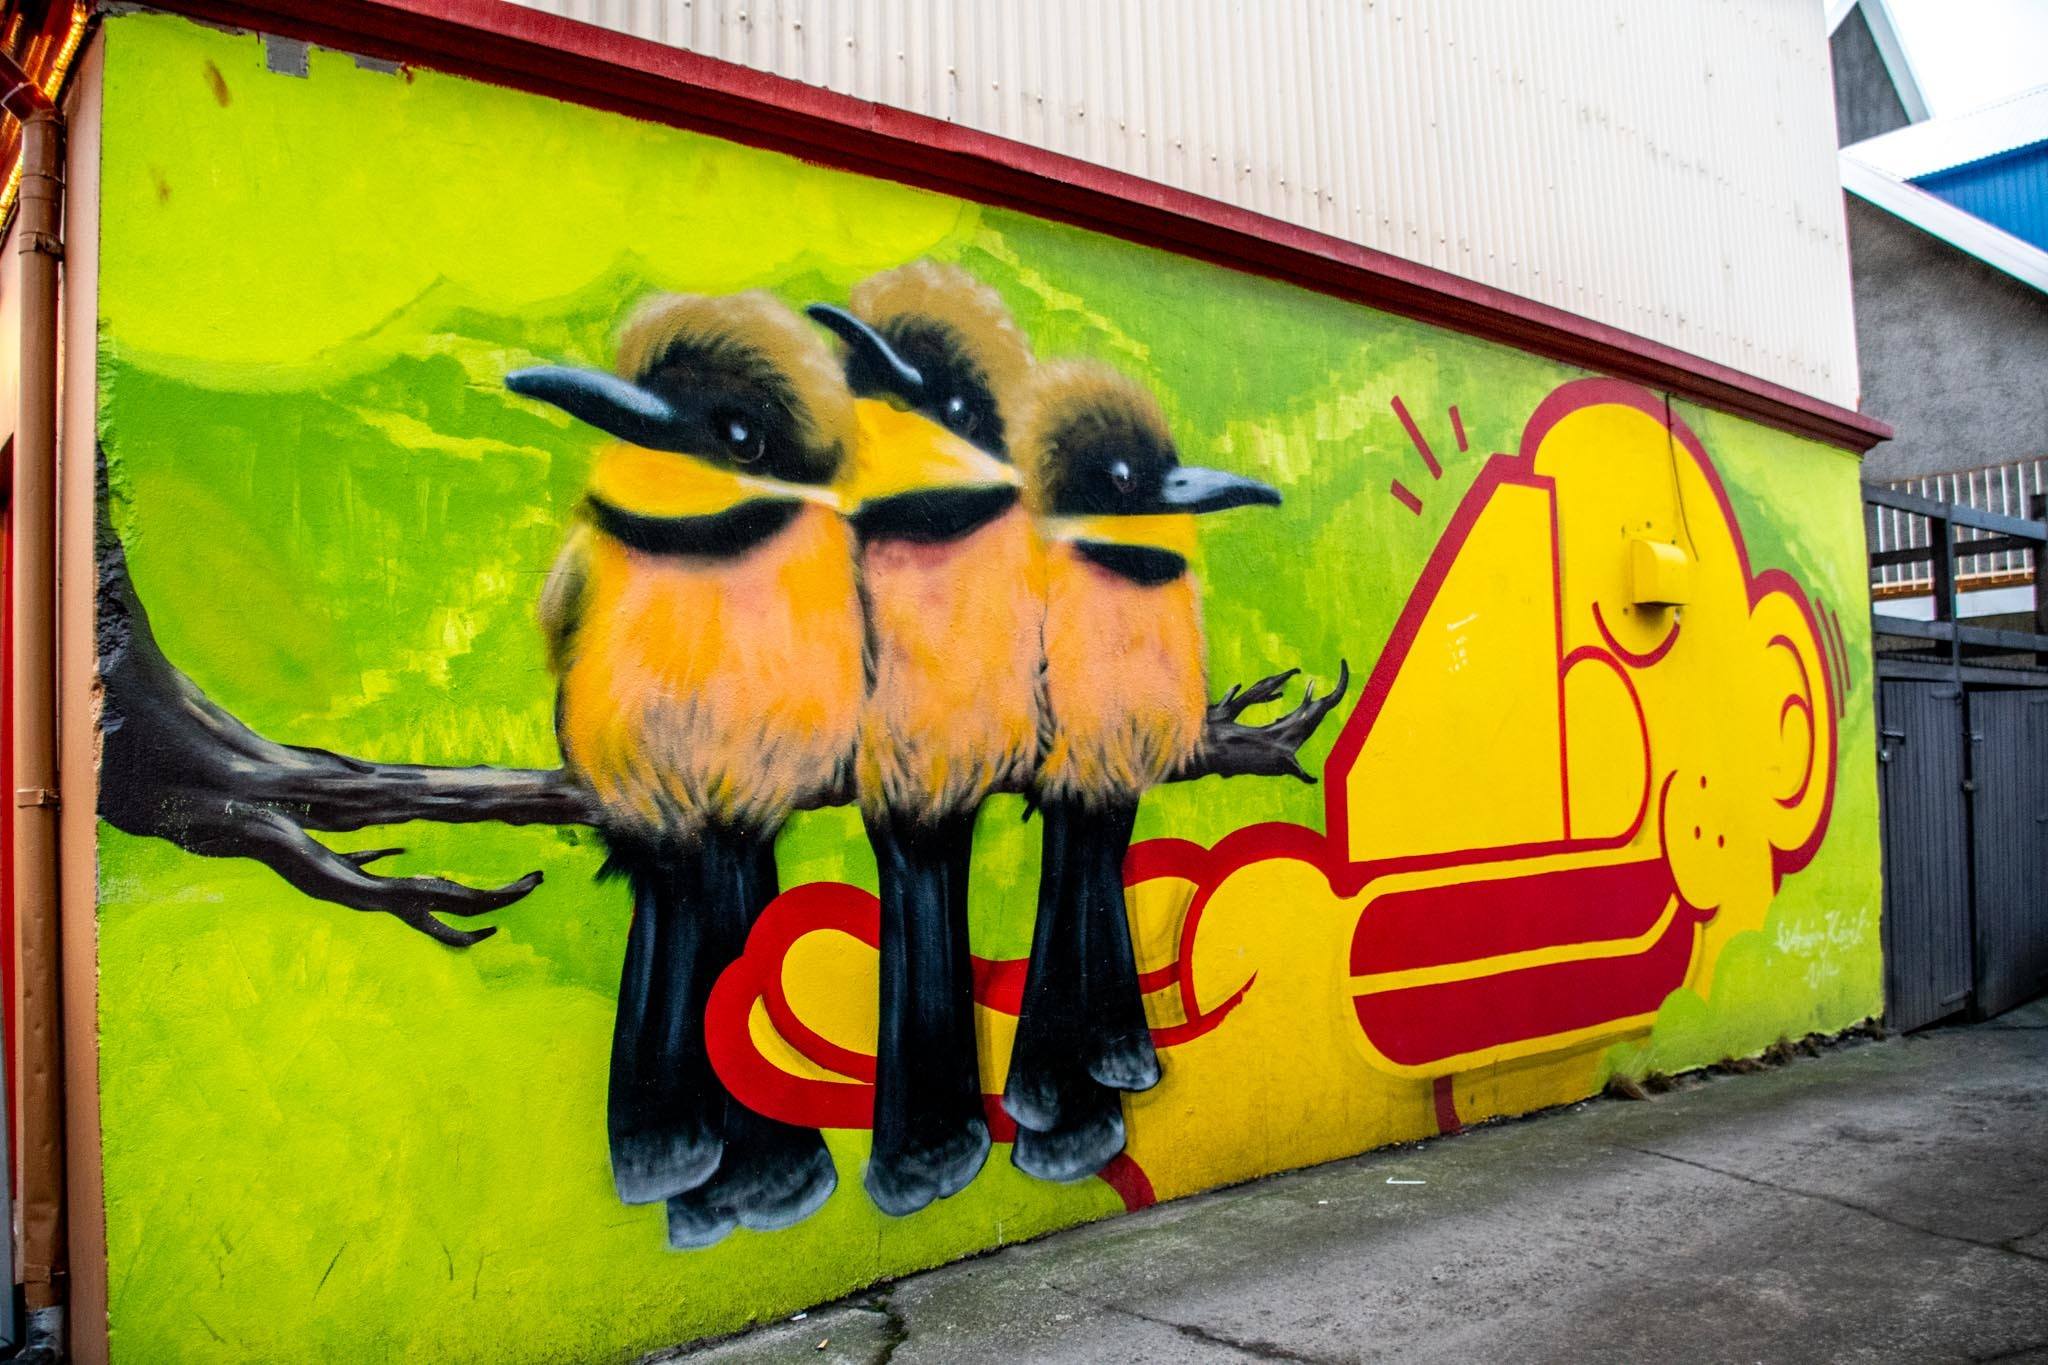 Three birds wall mural is an example of Iceland street art